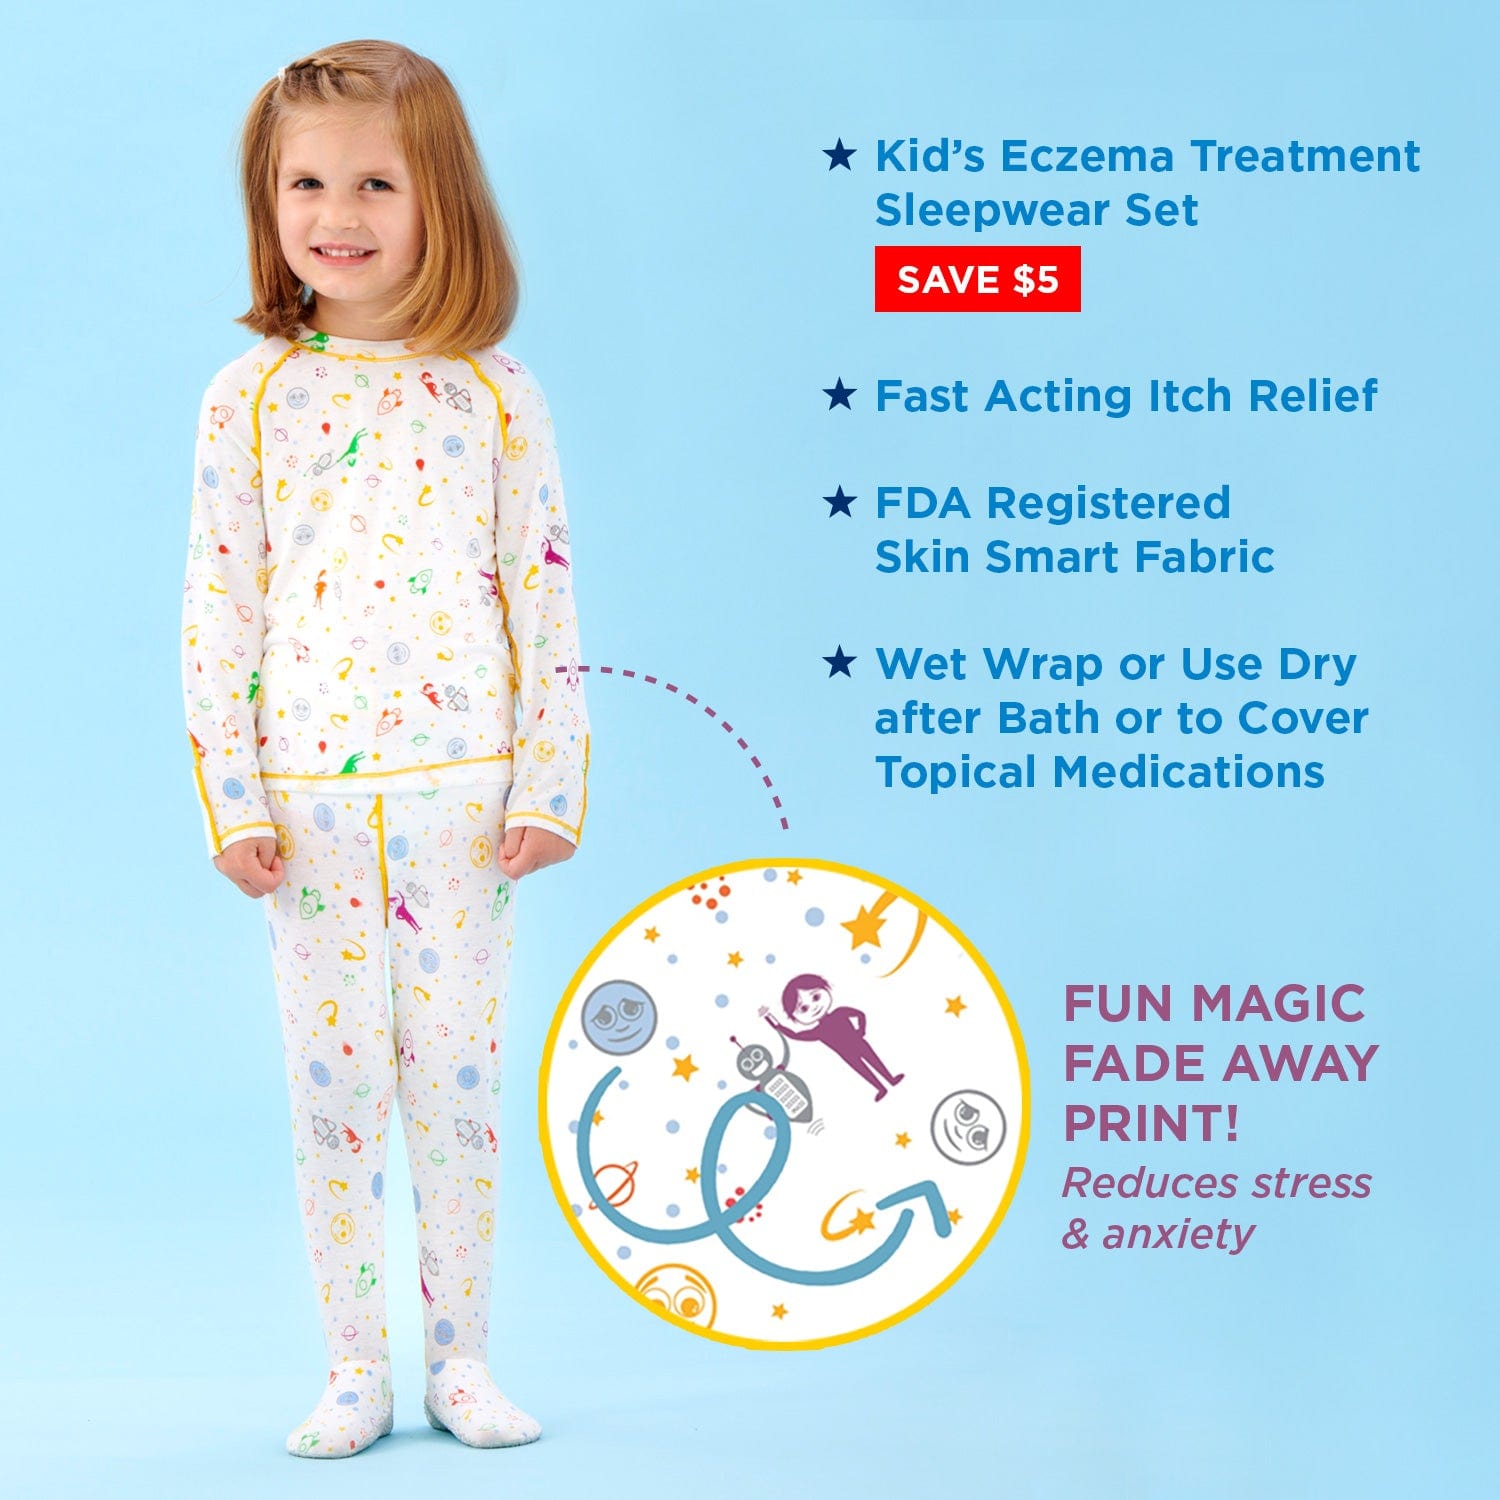 “Eczema Pajamas Sleep Shirt and Leggings for Toddler and Children made from Zinc TENCEL for Wet Wrapping Therapy and Itch Relief” 